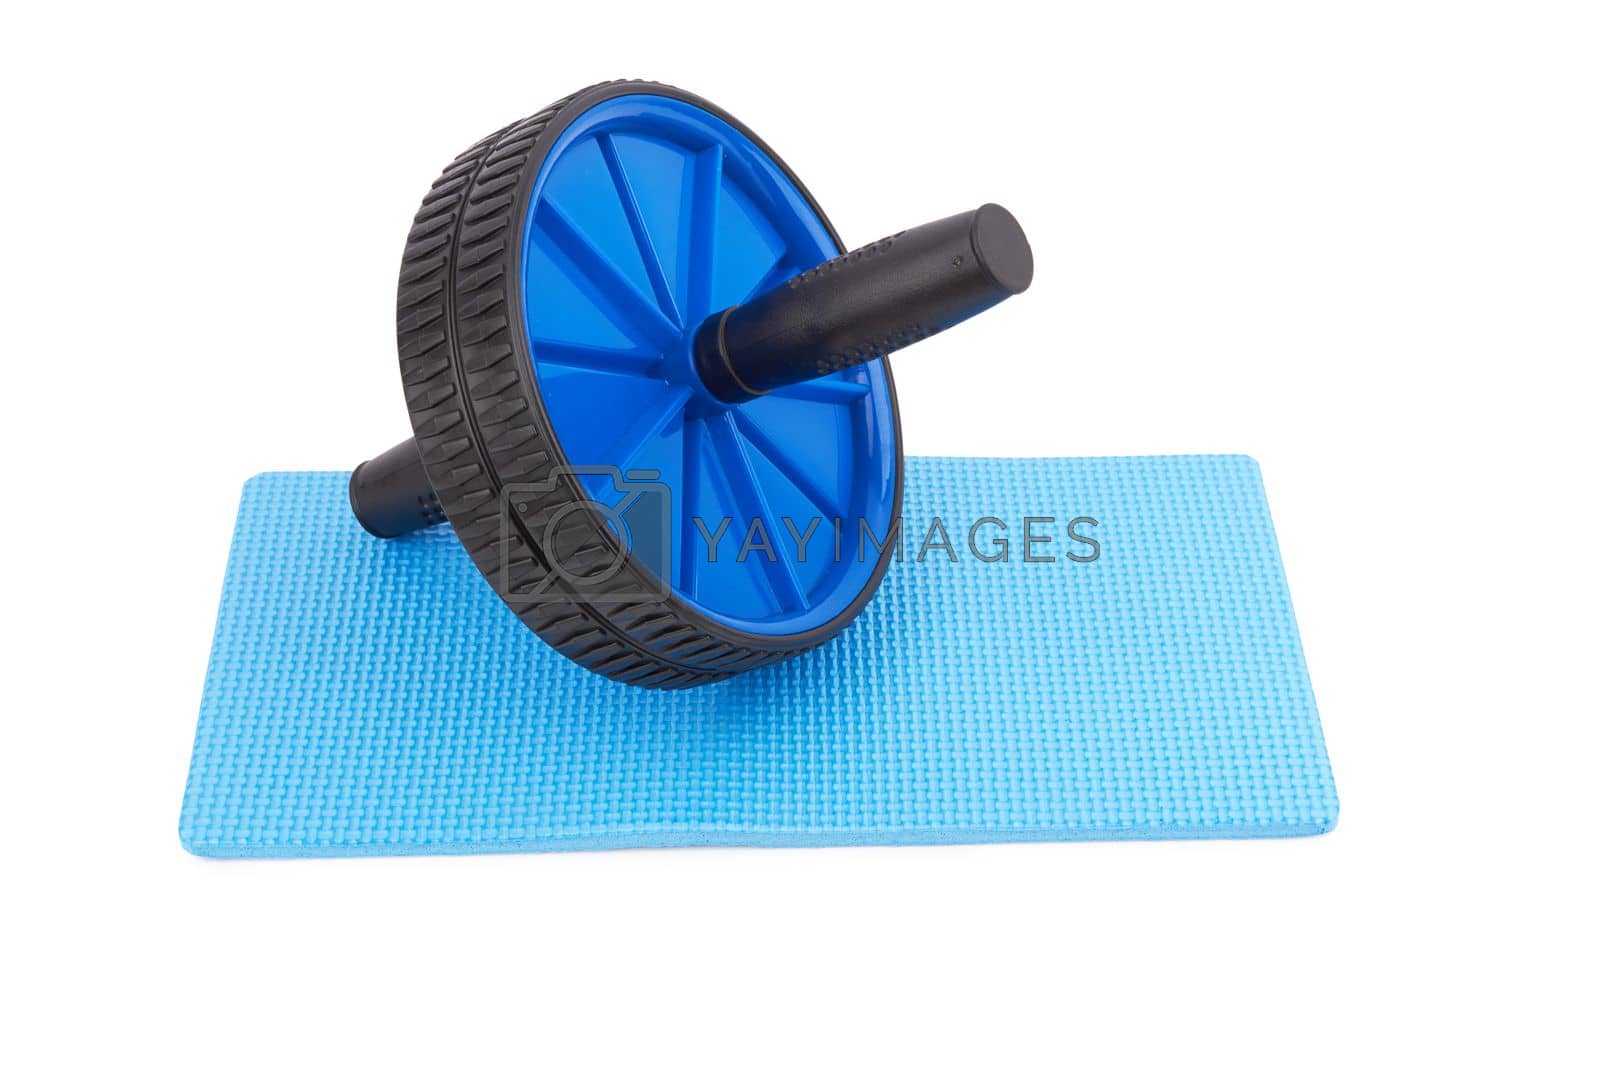 Royalty free image of Home fitness fitness wheel by pioneer111